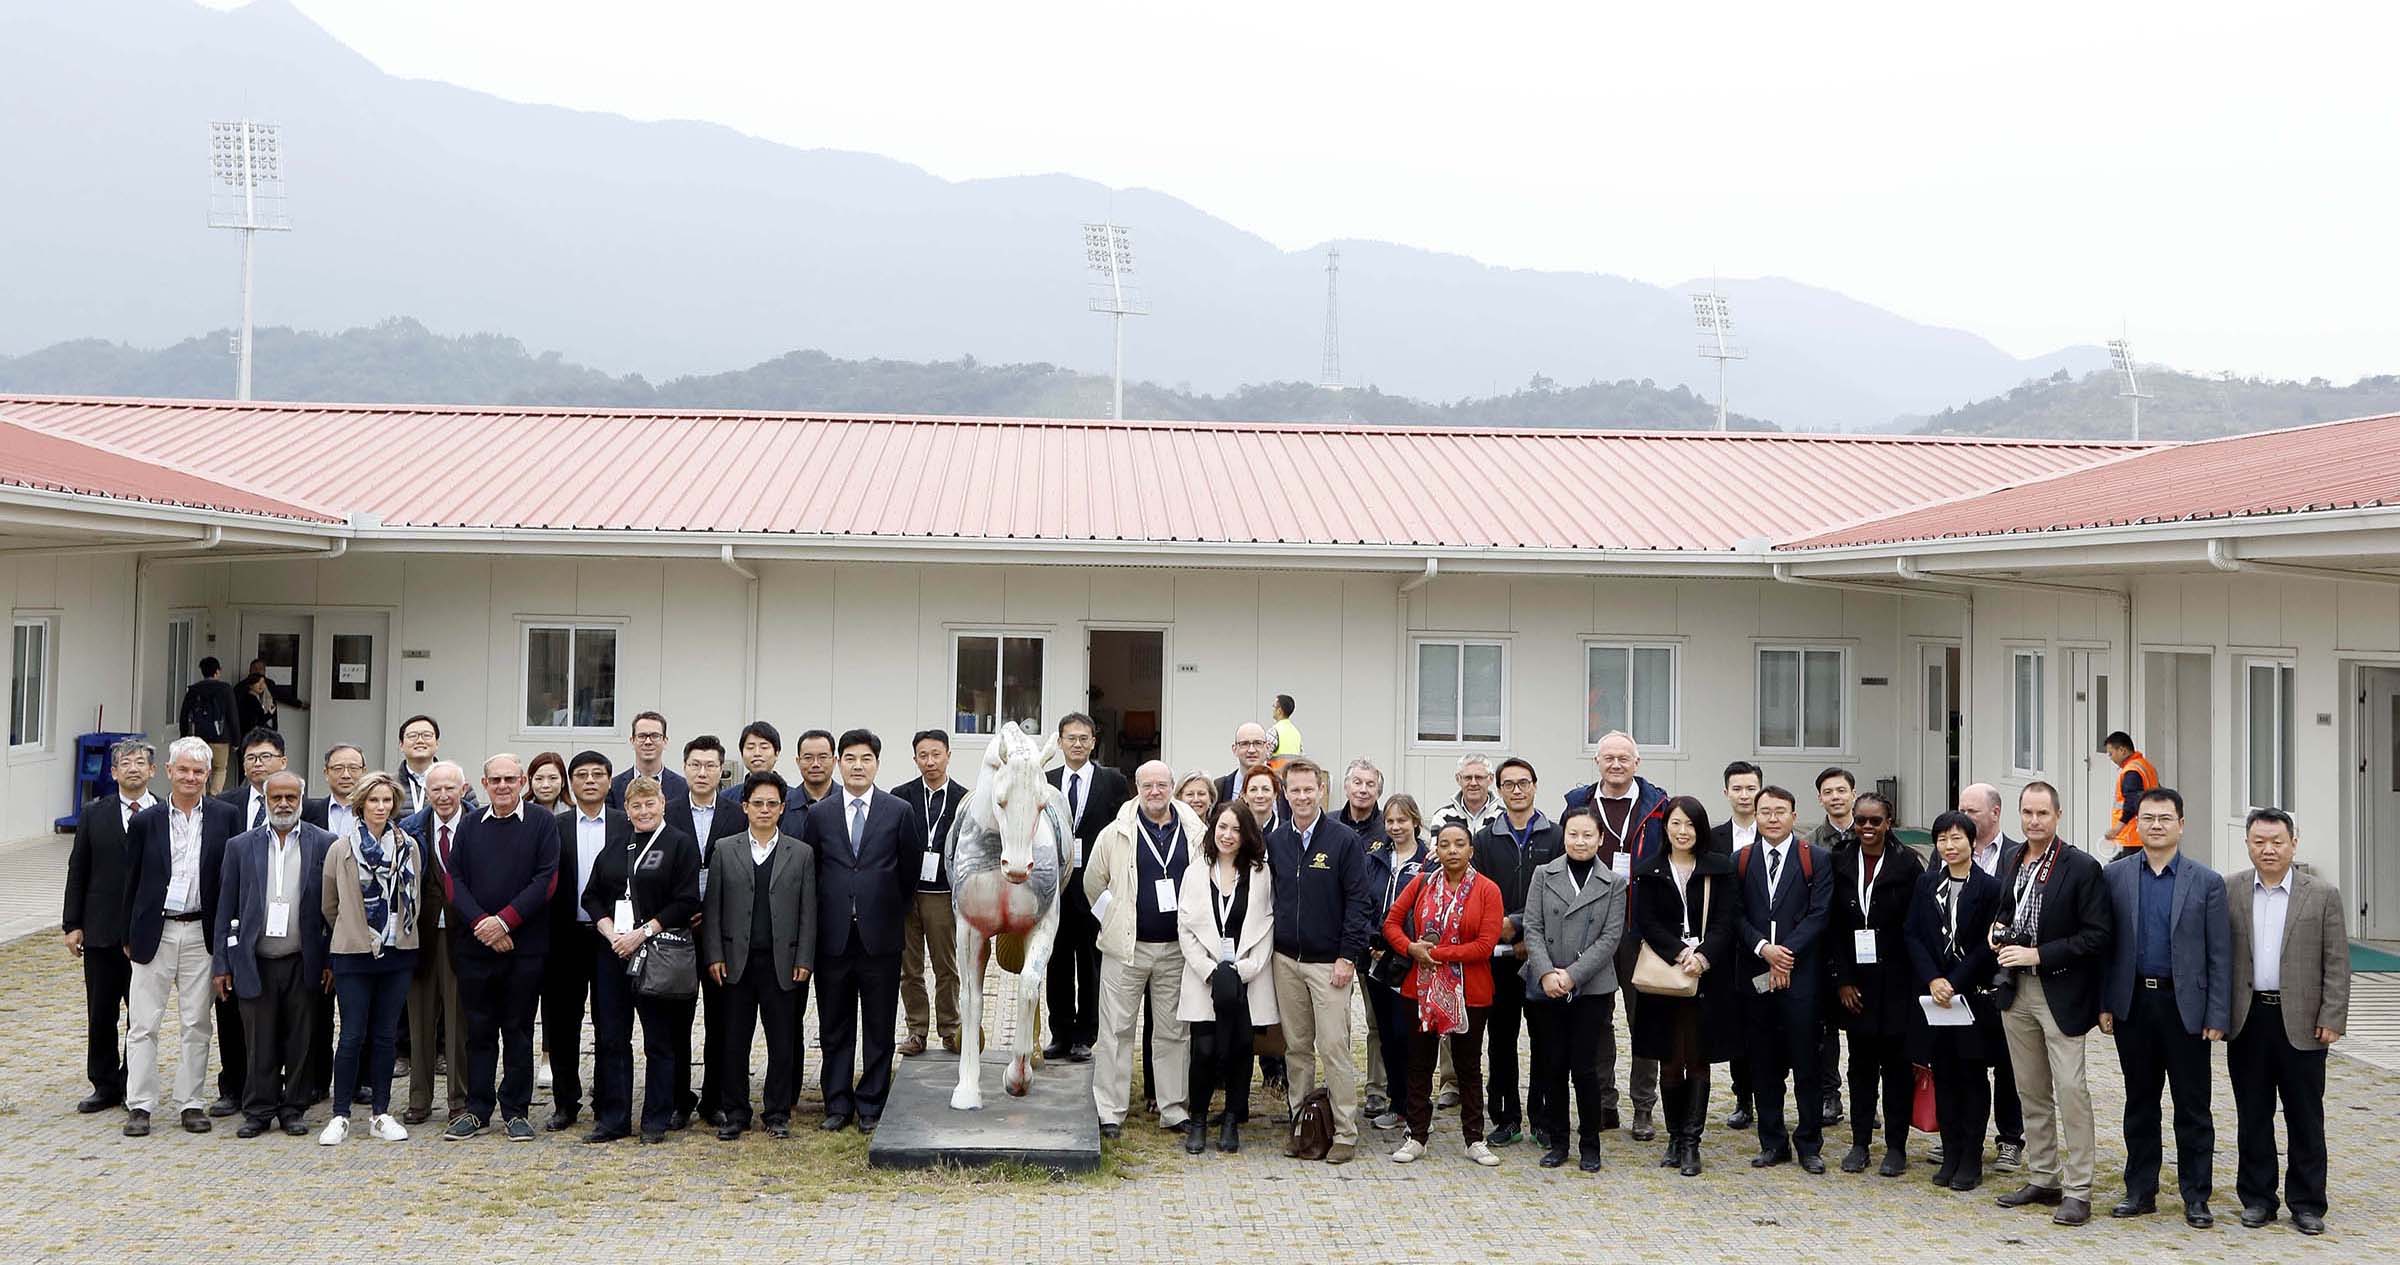 Government officials from the Hong Kong SAR and the Chinese Mainland, along with industry experts from around the world, toured the Hong Kong Jockey Club’s Conghua Training Centre on Wednesday (13, December 2017).